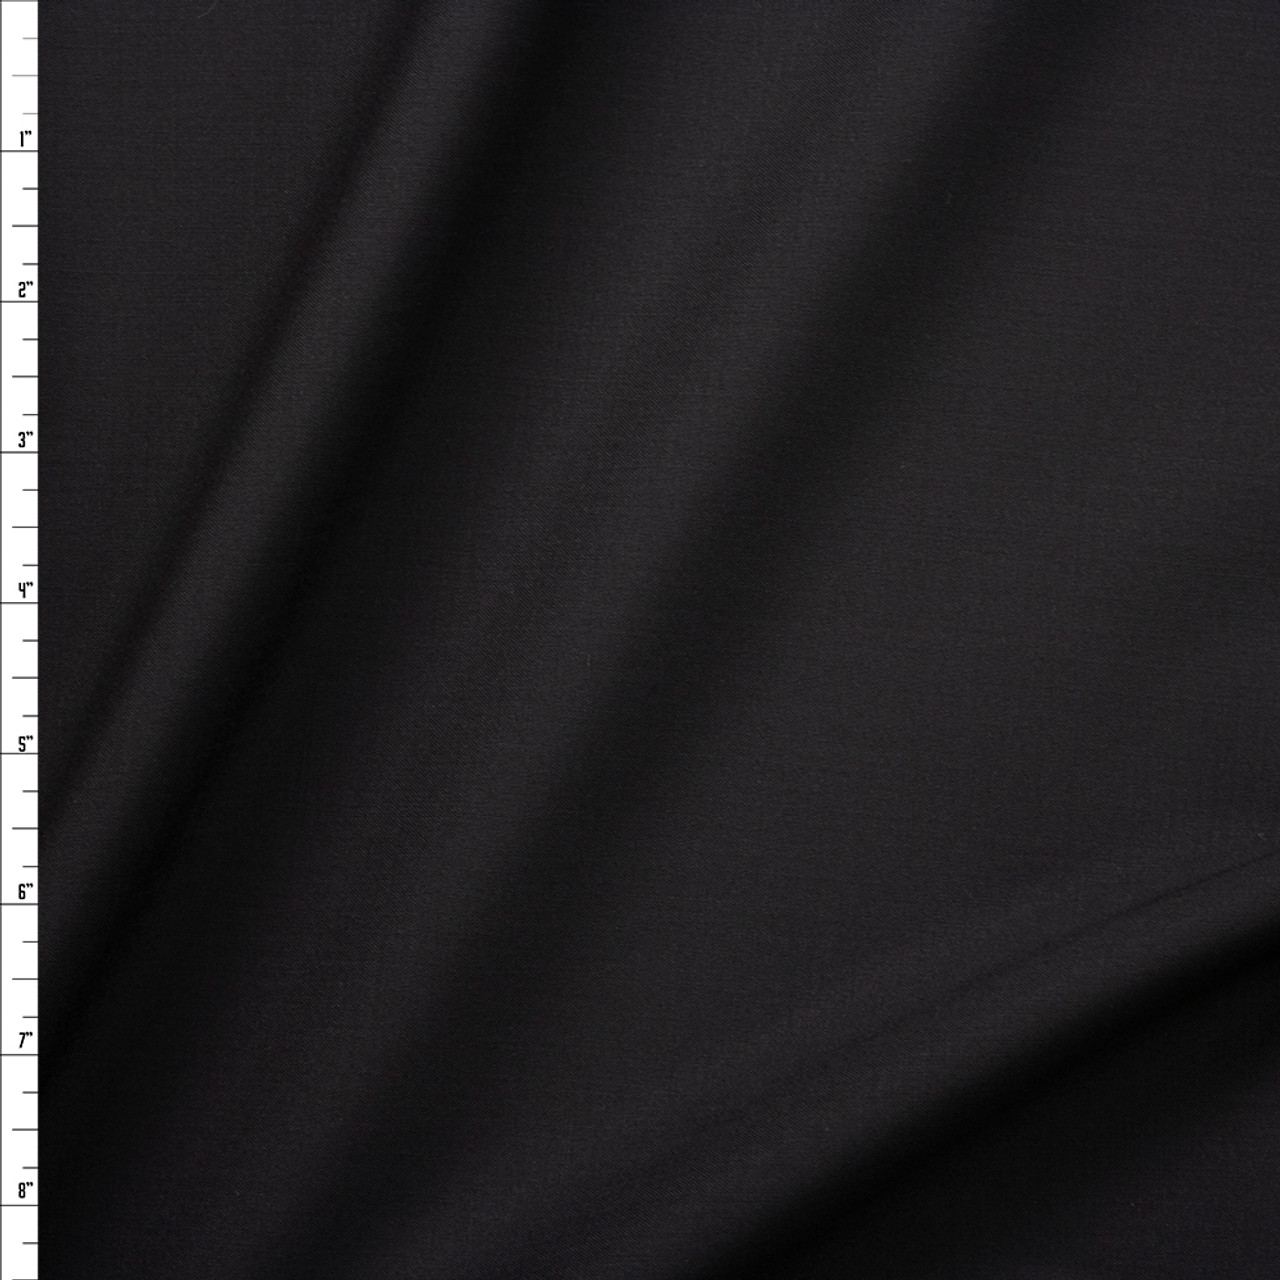 Cali Fabrics Black Crisp Midweight Poly/Wool Suiting Fabric by the